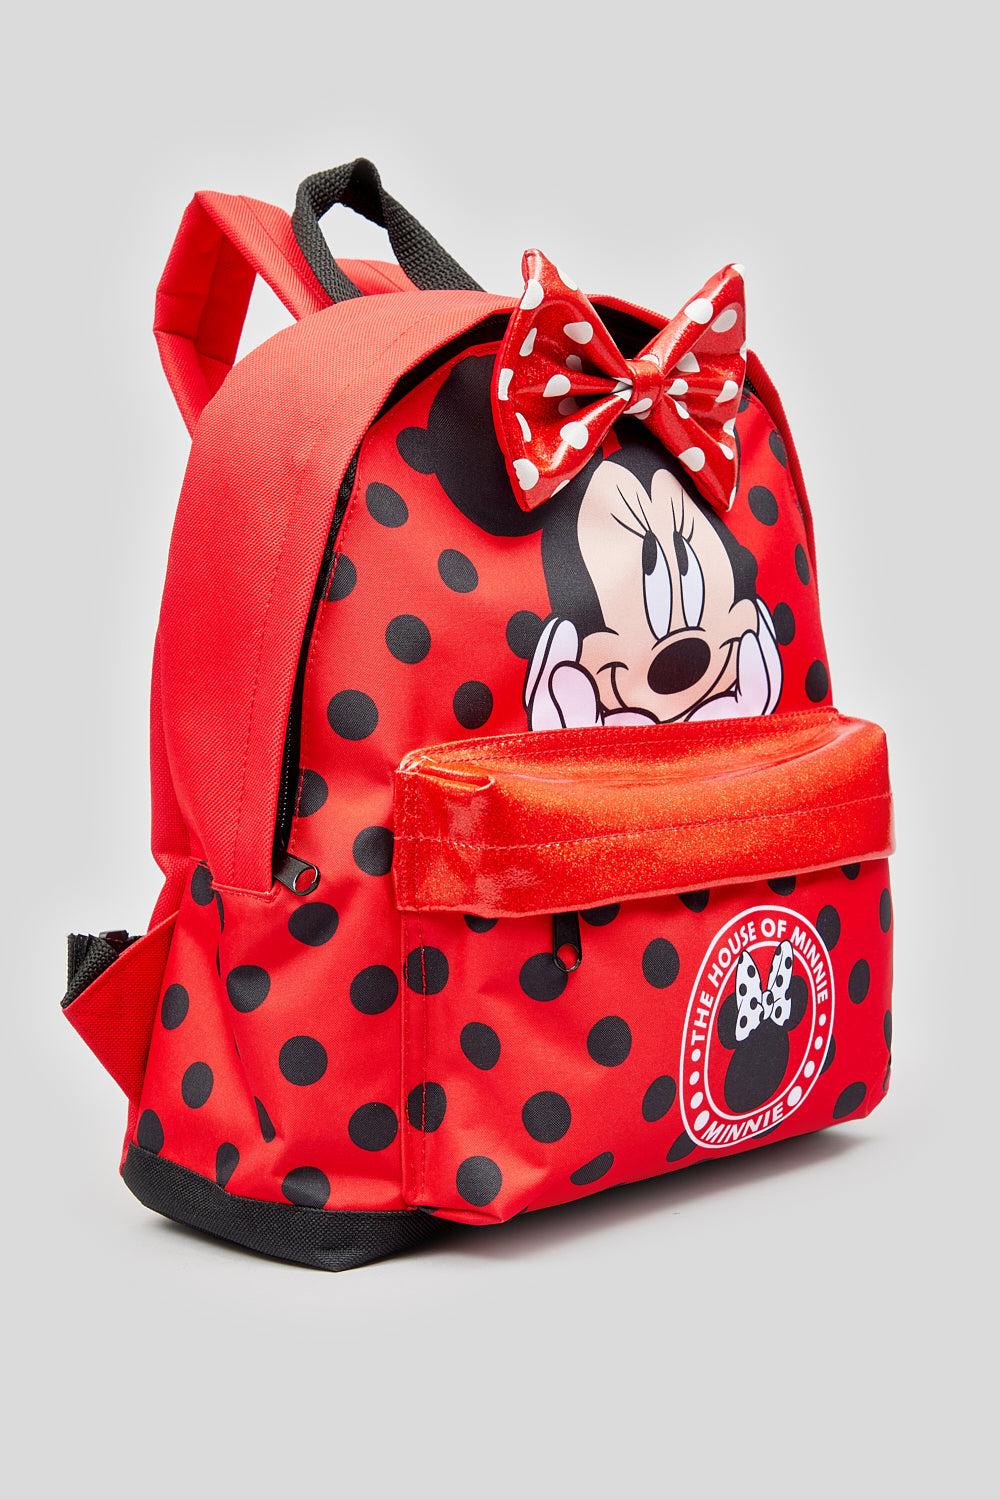 MINNIE MOUSE TRADITIONAL POLKA ROXY BACKPACK